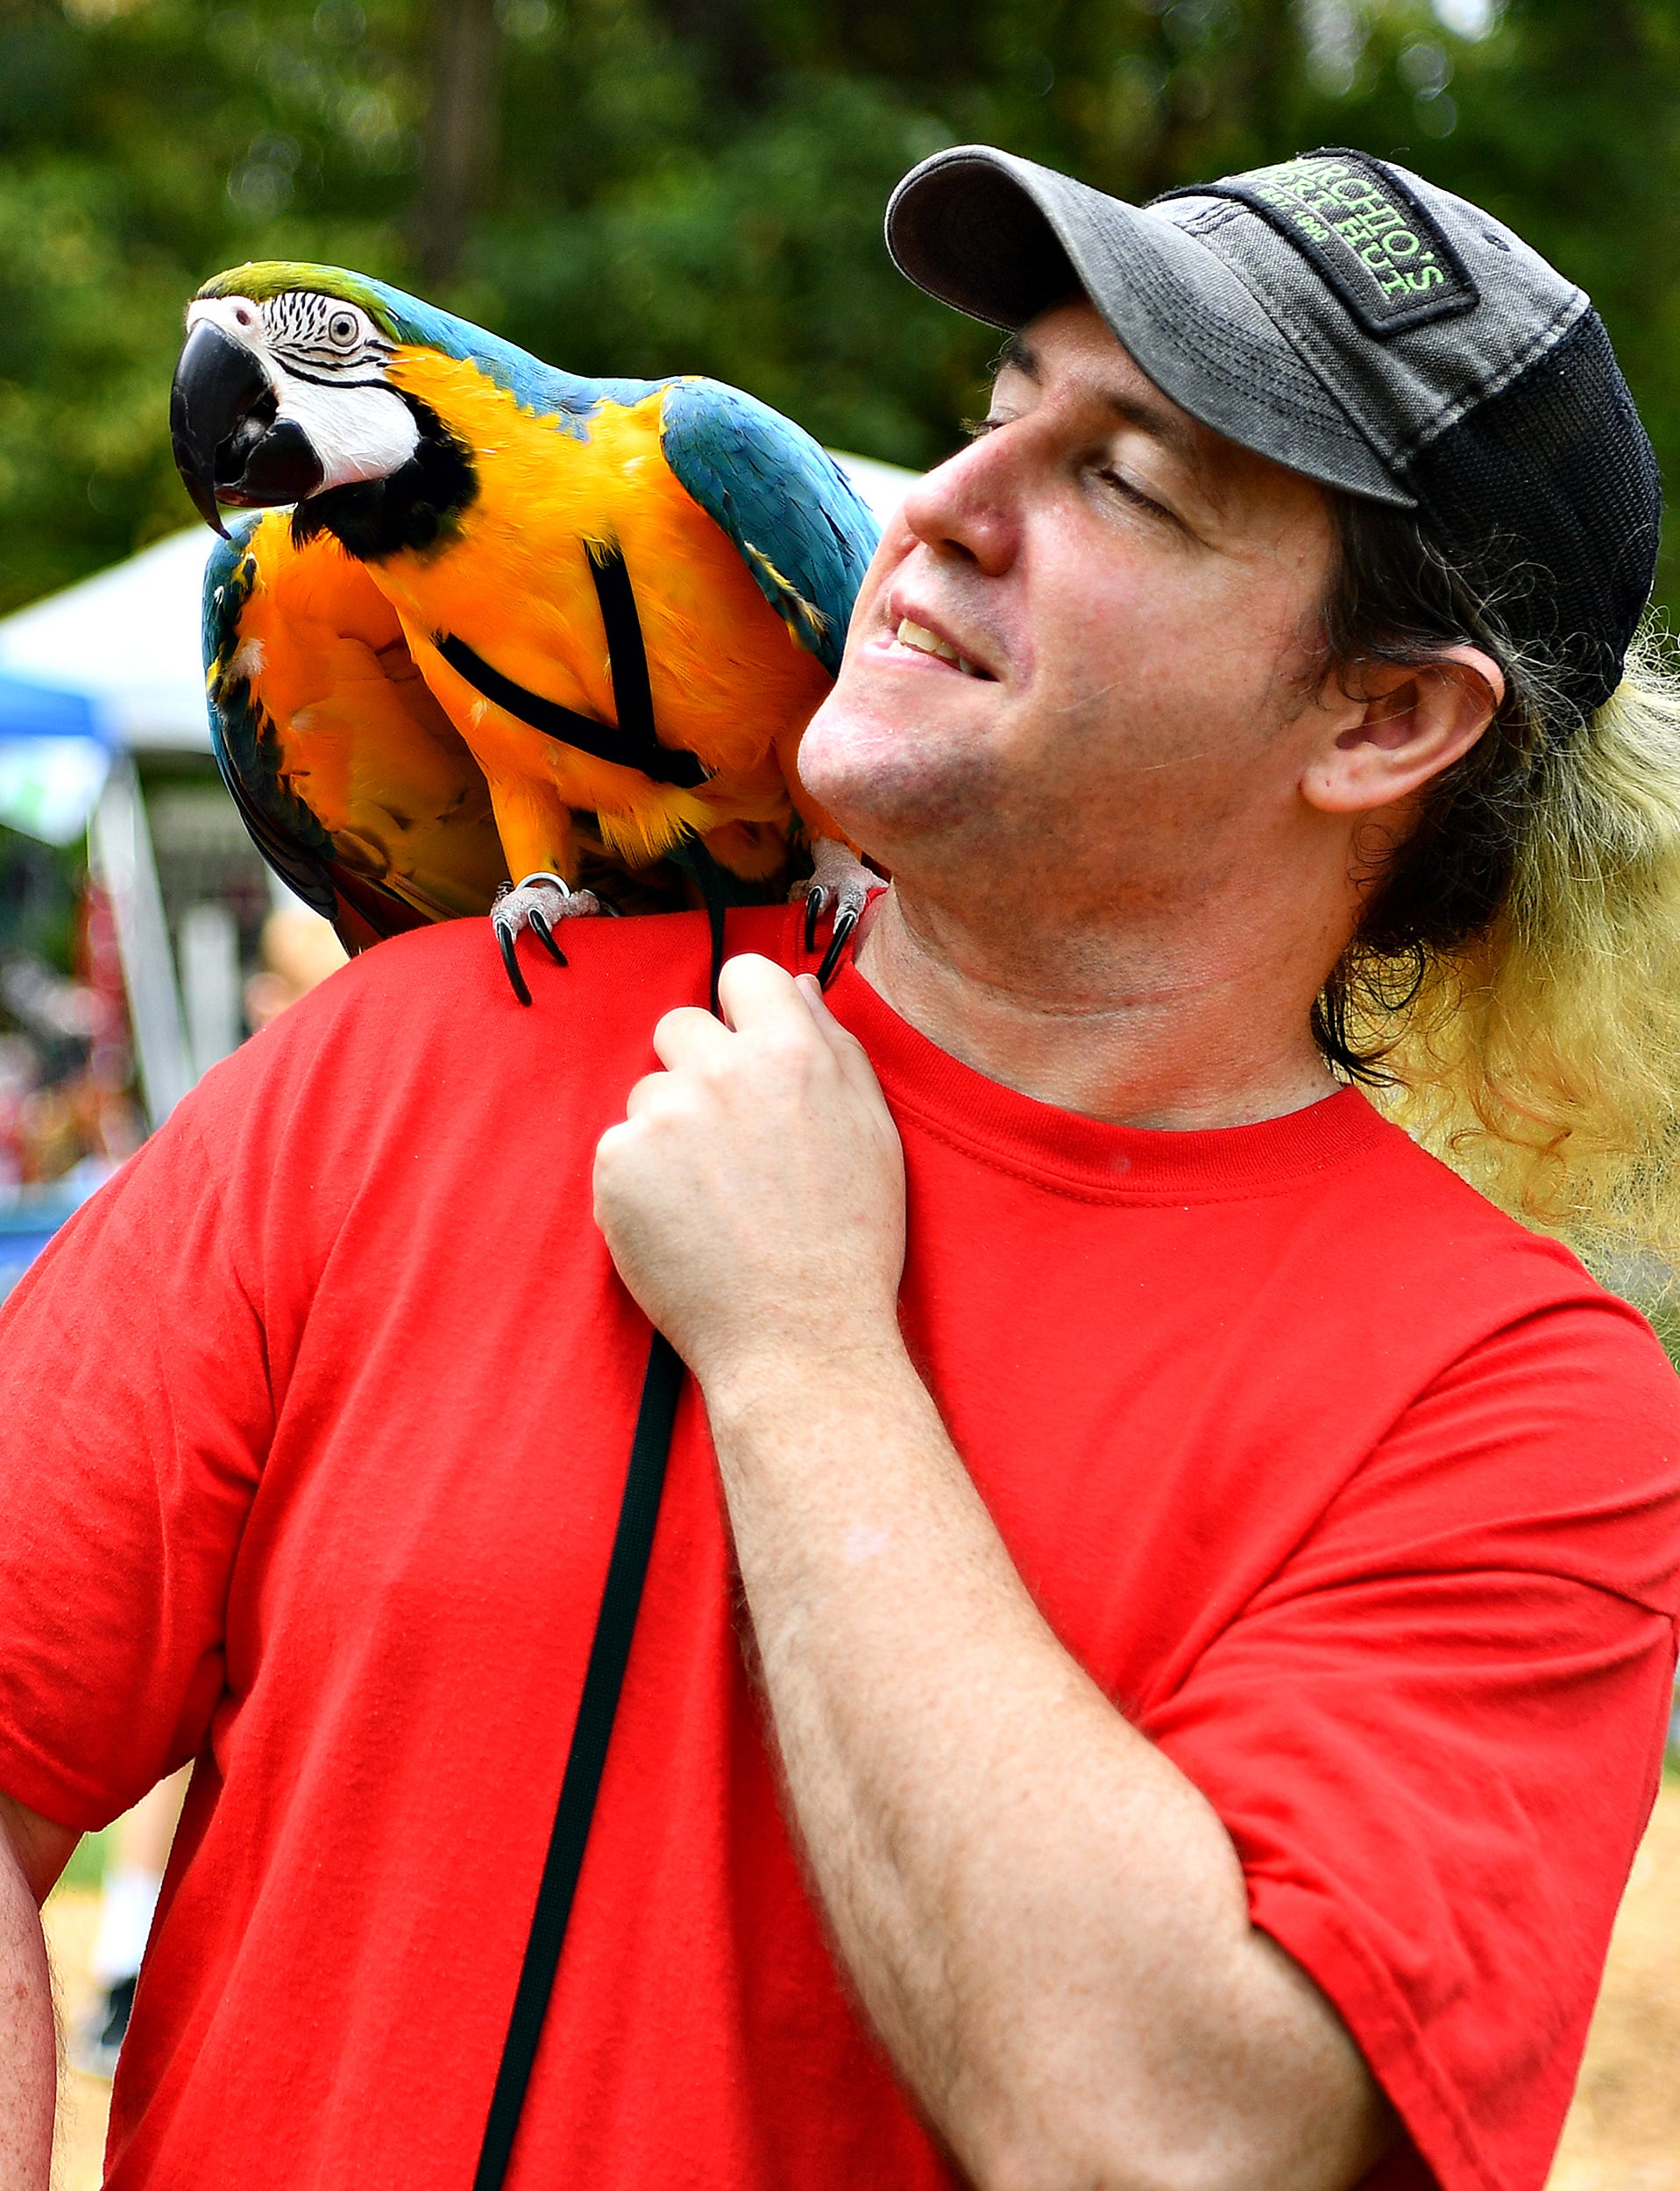 Chuck Nelson, of Hanover, walks about with 6-year-old Loki, a blue and gold macaw, during  the 8th annual Pagan Pride Festival at Samuel S. Lewis State Park in Lower Windsor Township, Saturday, Sept. 28, 2019. Dawn J. Sagert photo